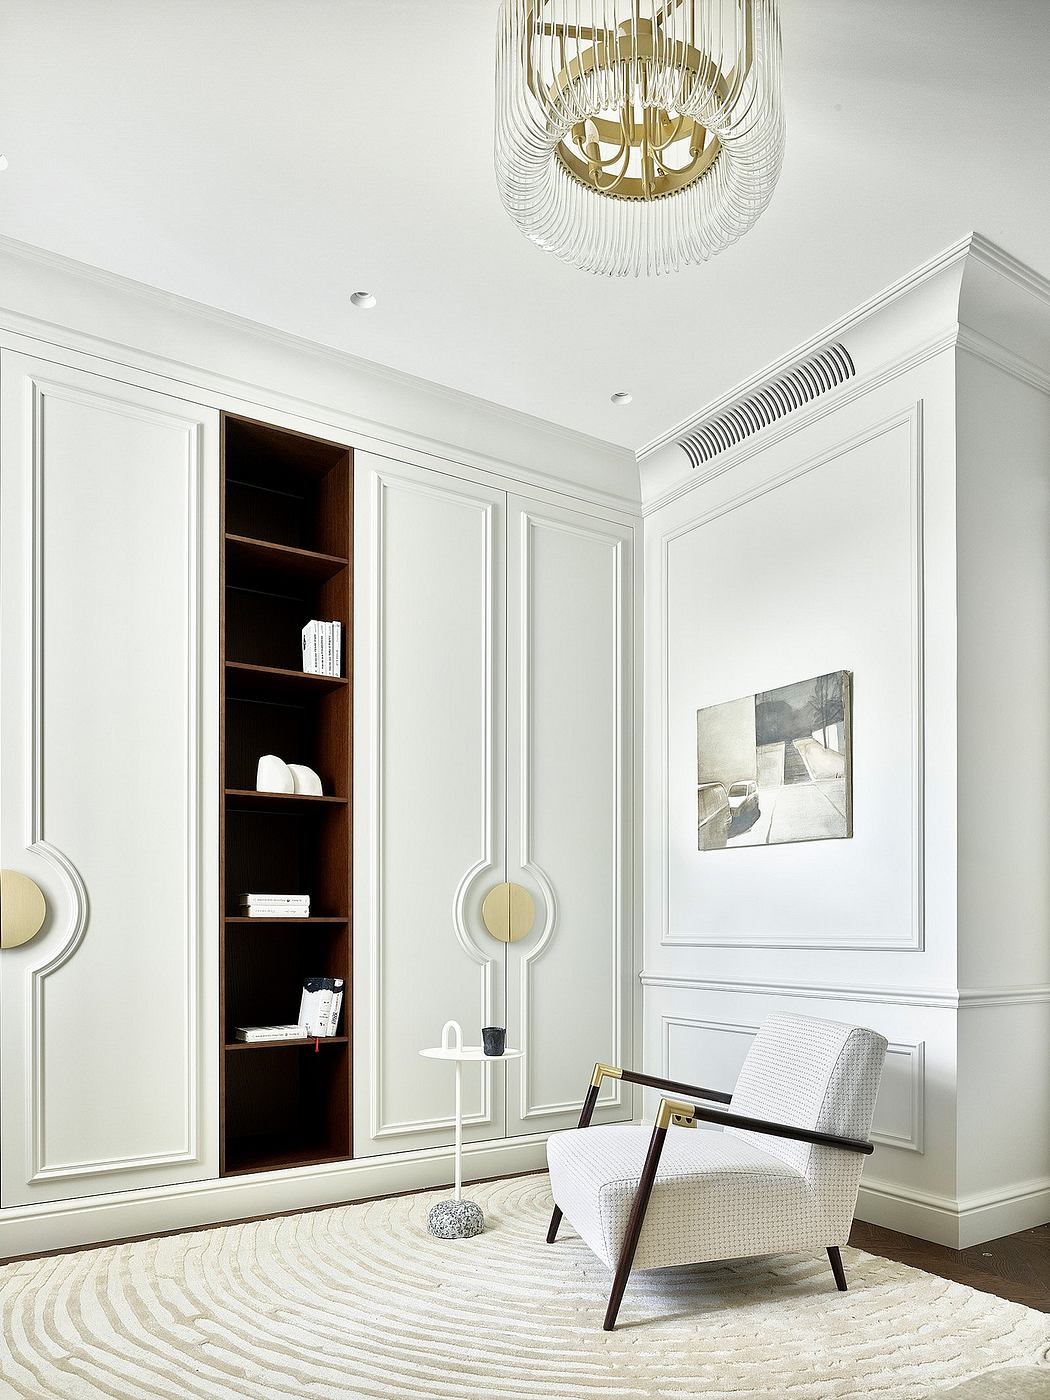 Elegant room with white wainscoting, modern chandelier, and built-in shelving.